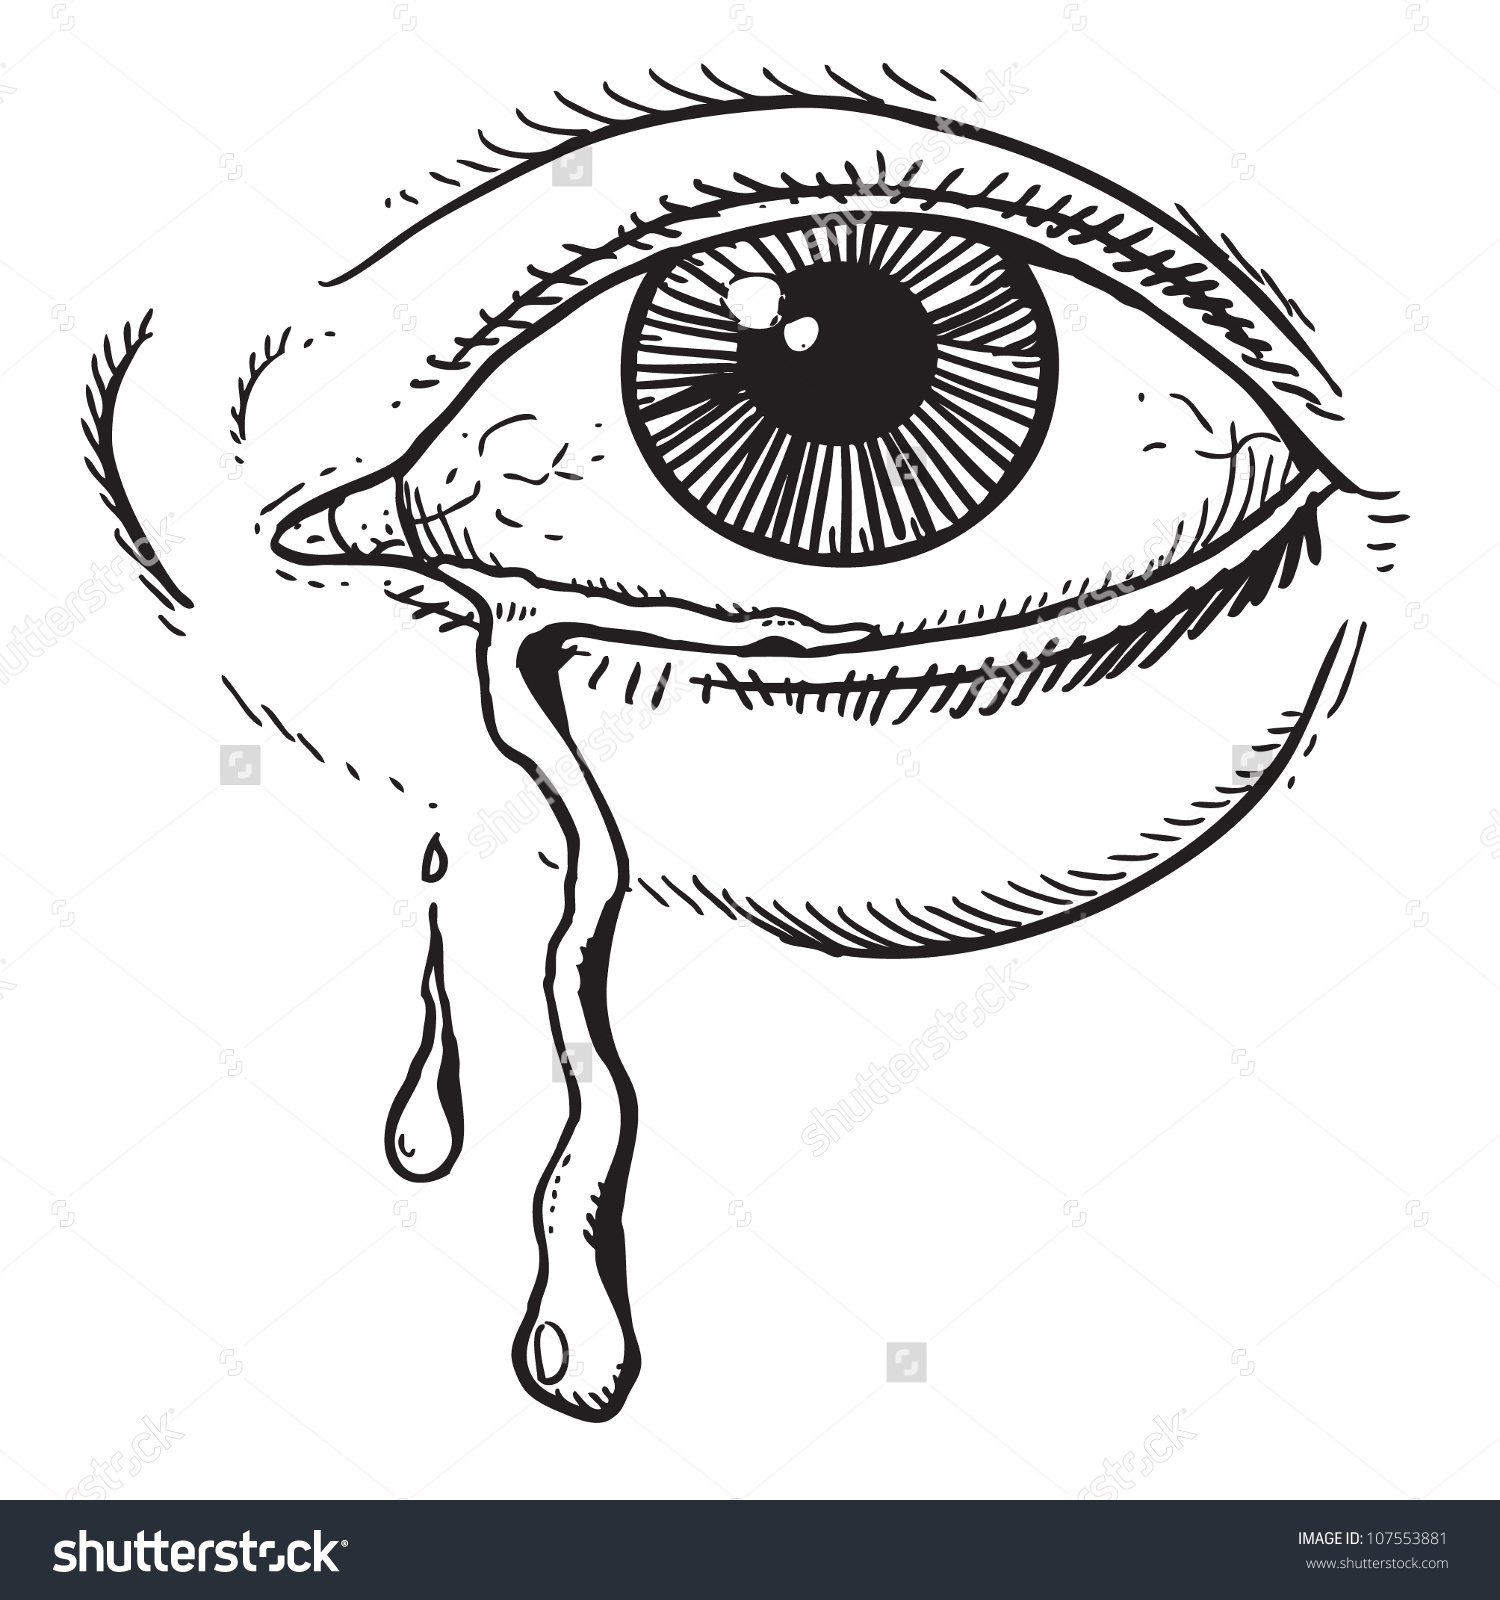 Image About Grunge In Sad By Ingvild On We Heart It  Crying Pair Of Eyes  Drawing Transparent PNG  500x427  Free Download on NicePNG